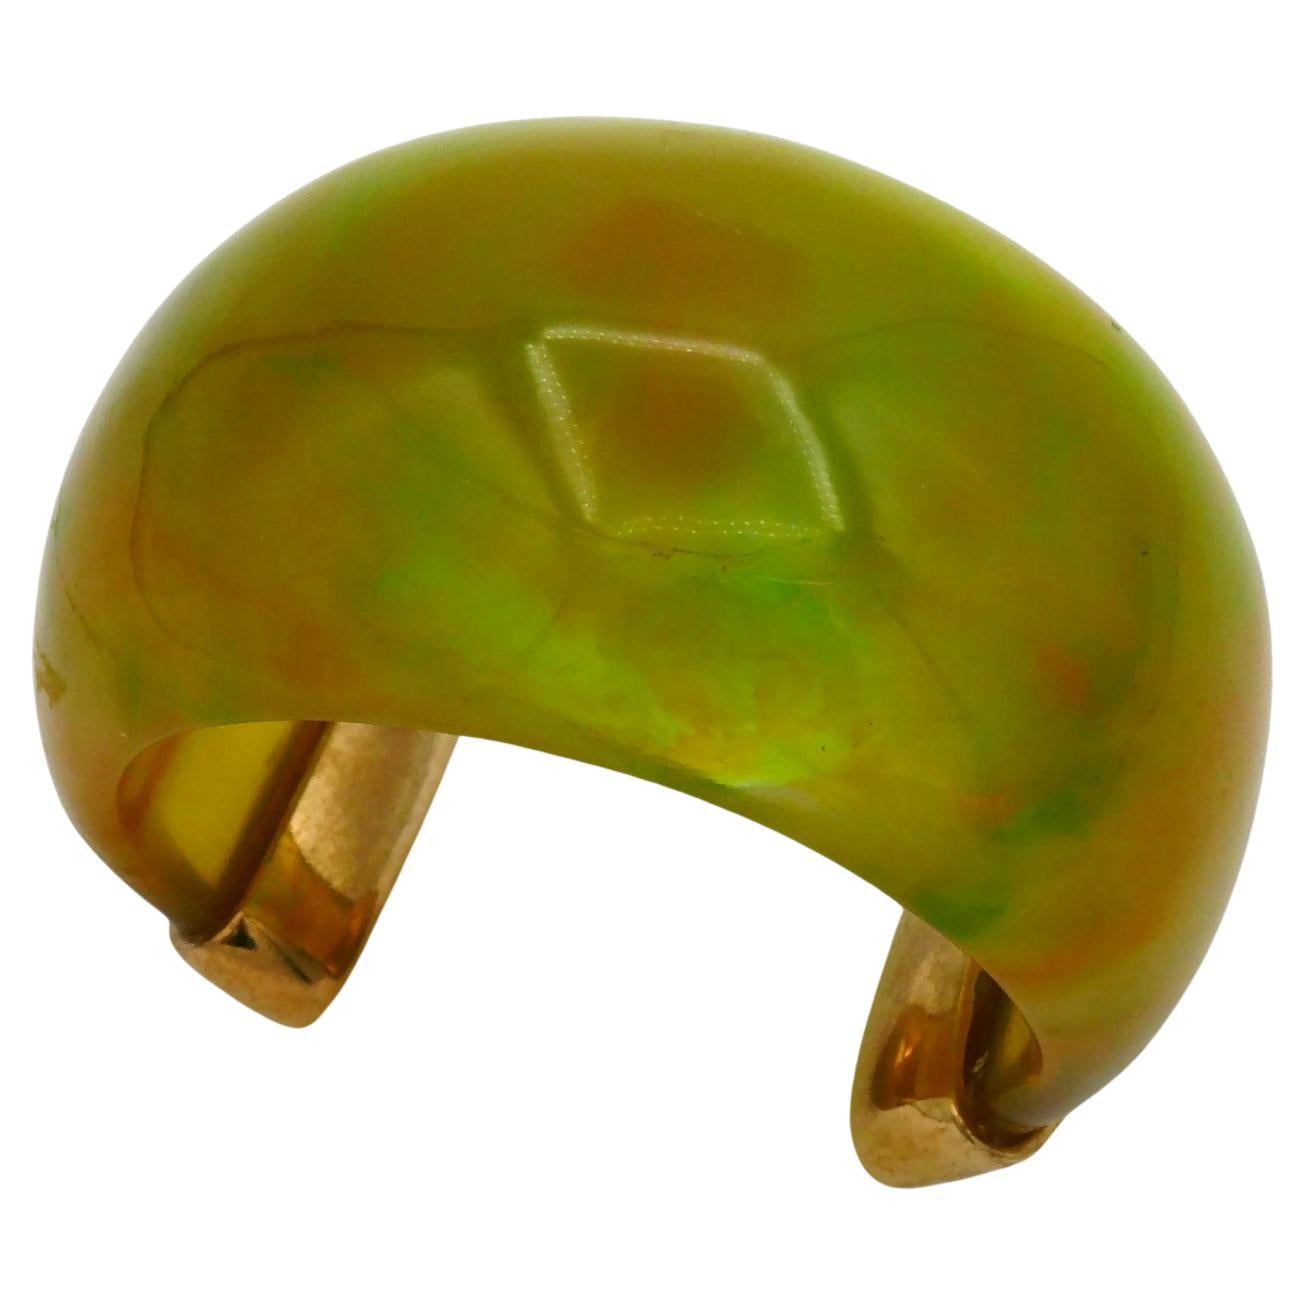 YVES SAINT LAURENT YSL Vintage Yellow Green Marbled Resin Cuff Bracelet For Sale